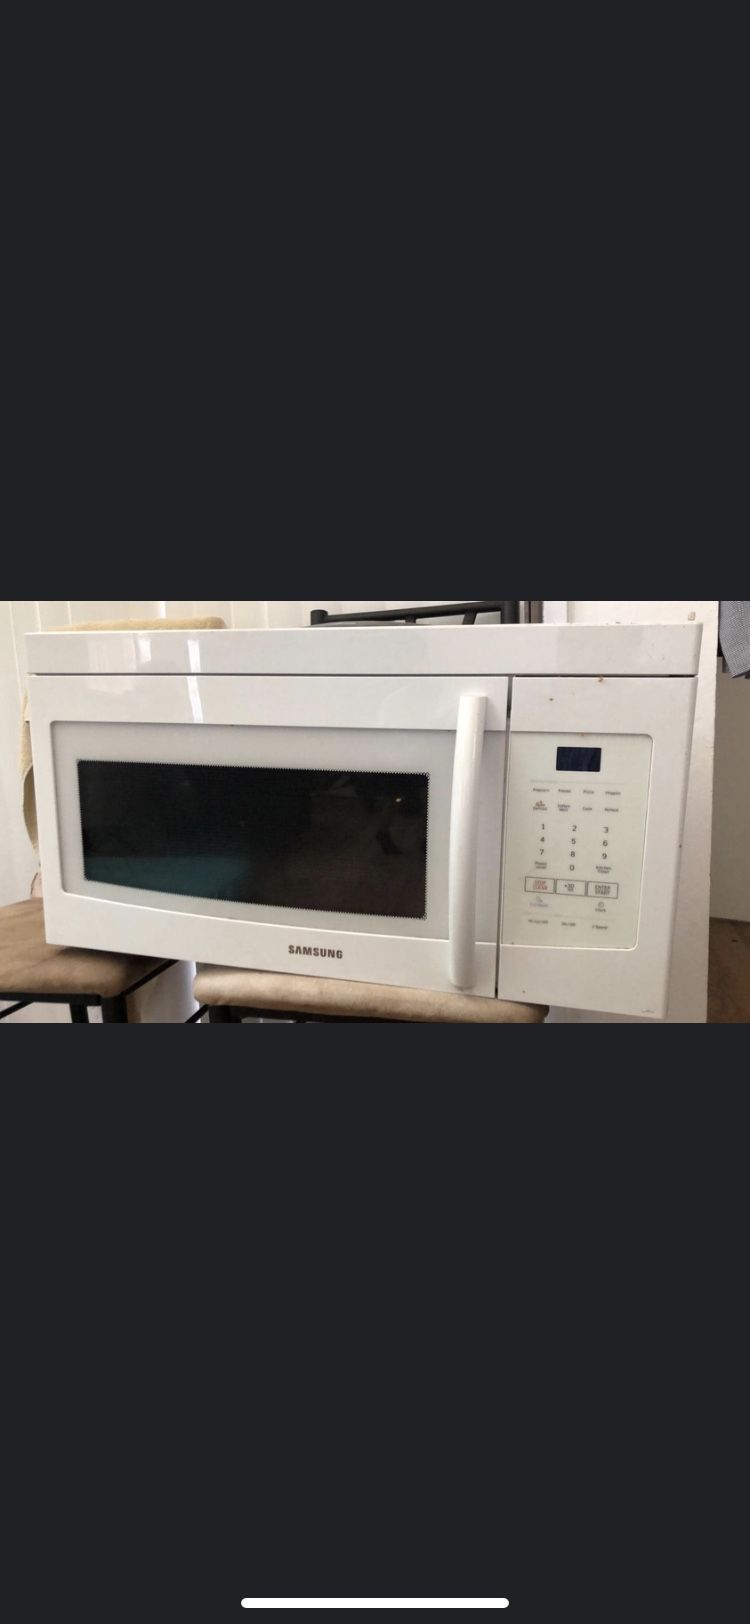 Microwave 2.6 to 3.0 cubic feet